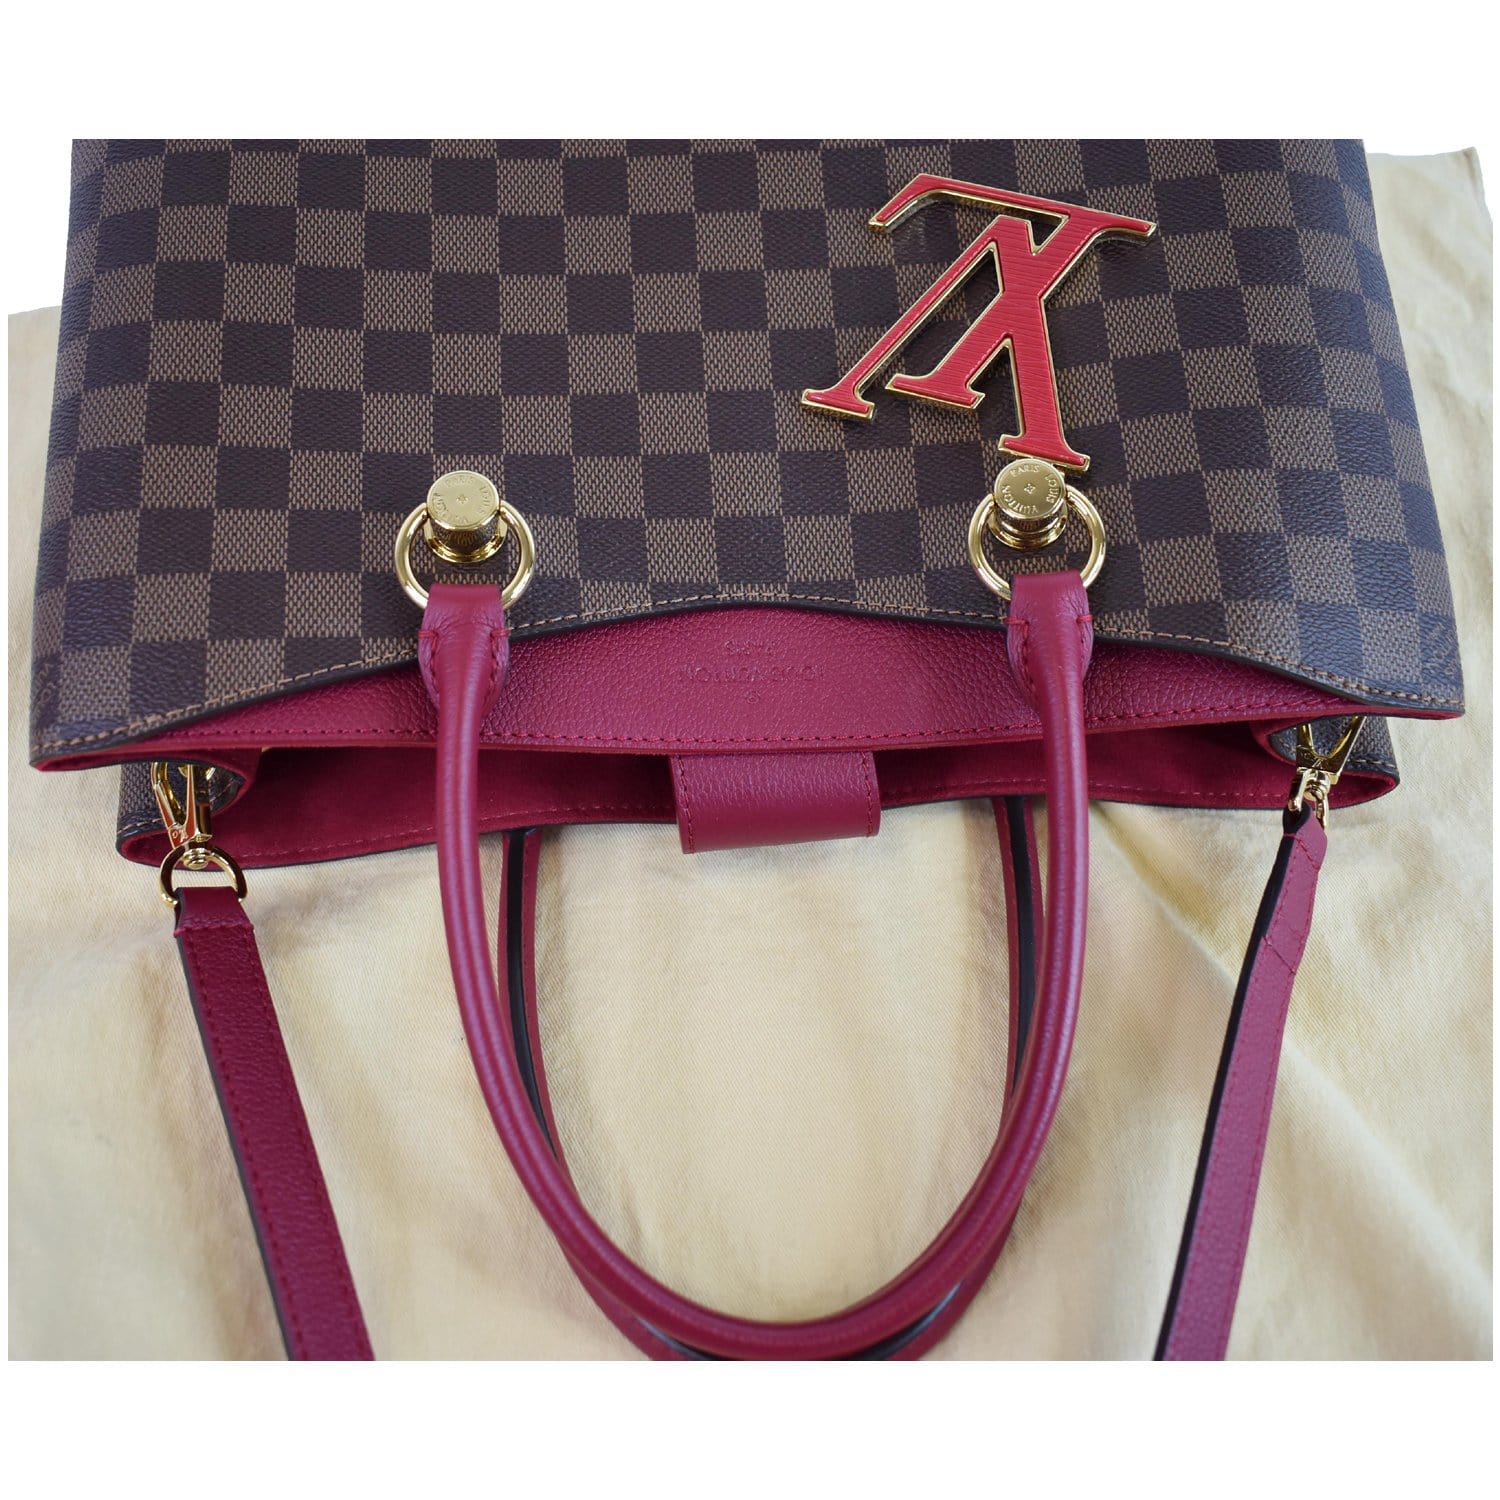  Louis Vuitton N40052 LV Riverside Damier 2-Way Shoulder Bag,  Handbag, Damier Canvas, Women's, Used, Brown x Red. Color indicated :  Rydovan : Clothing, Shoes & Jewelry